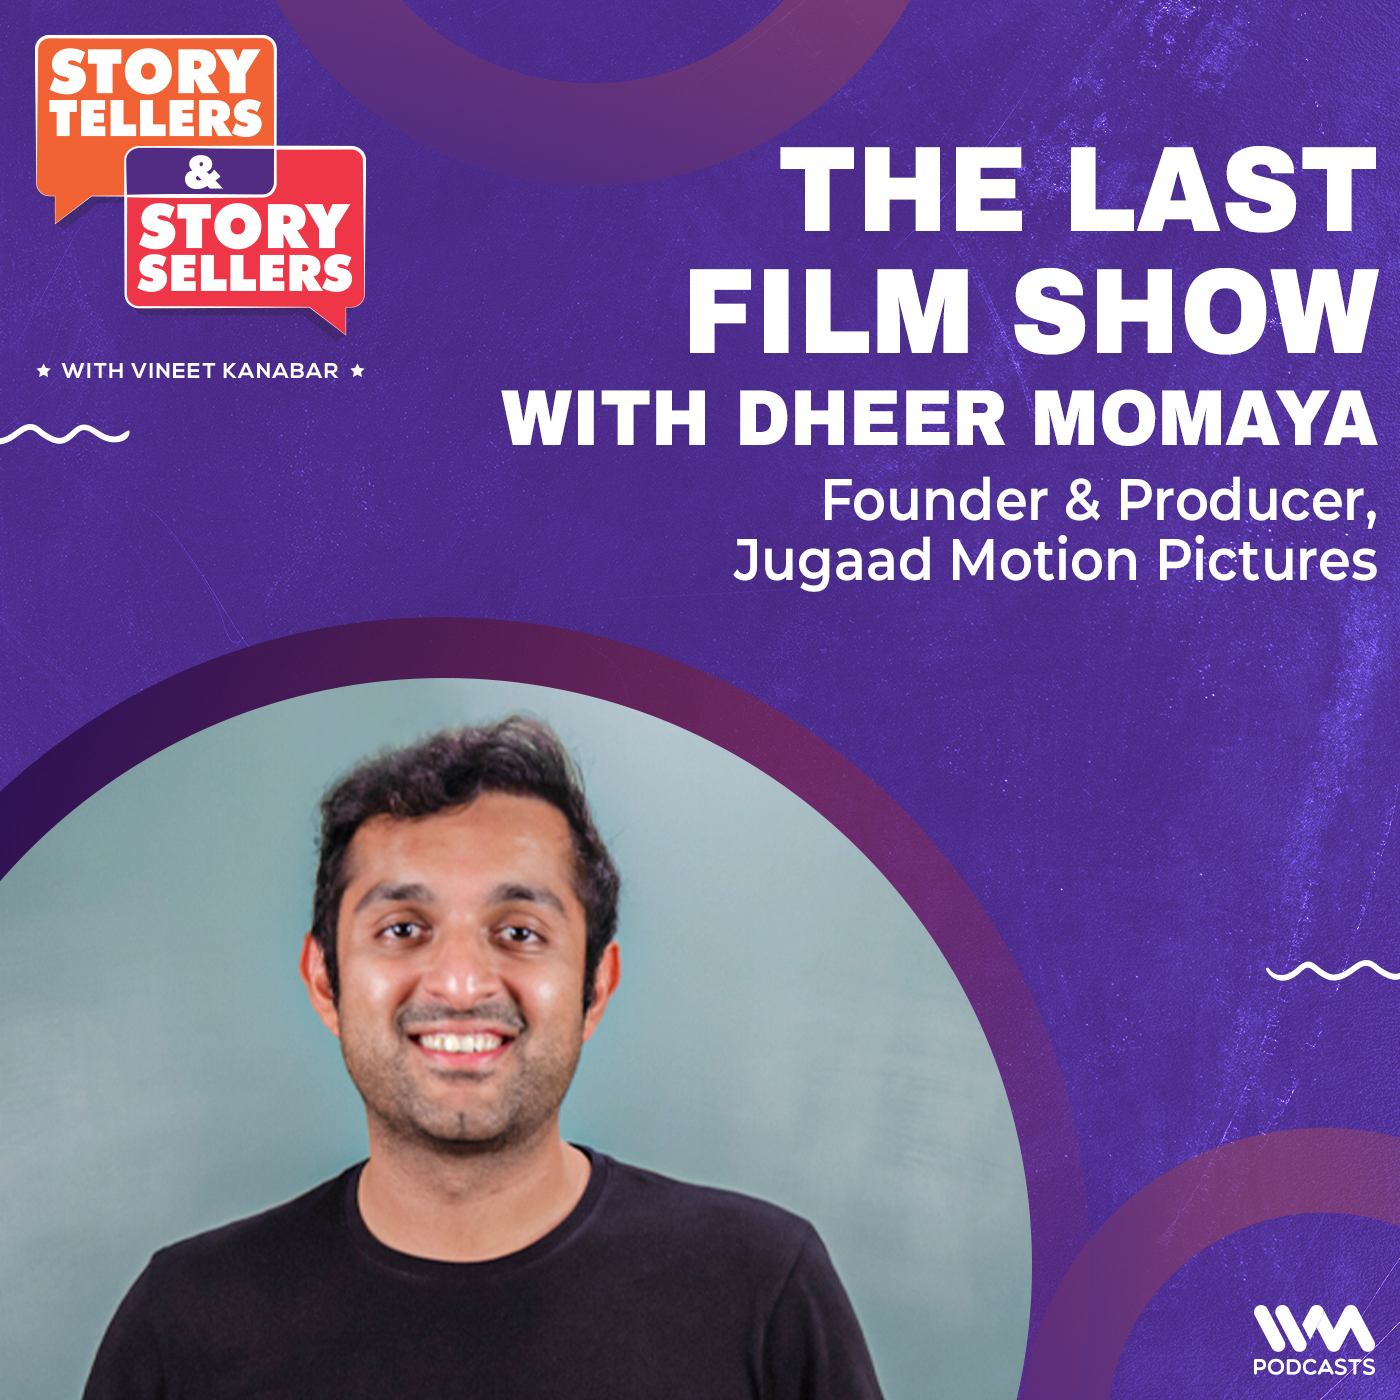 The Last Film Show with Dheer Momaya